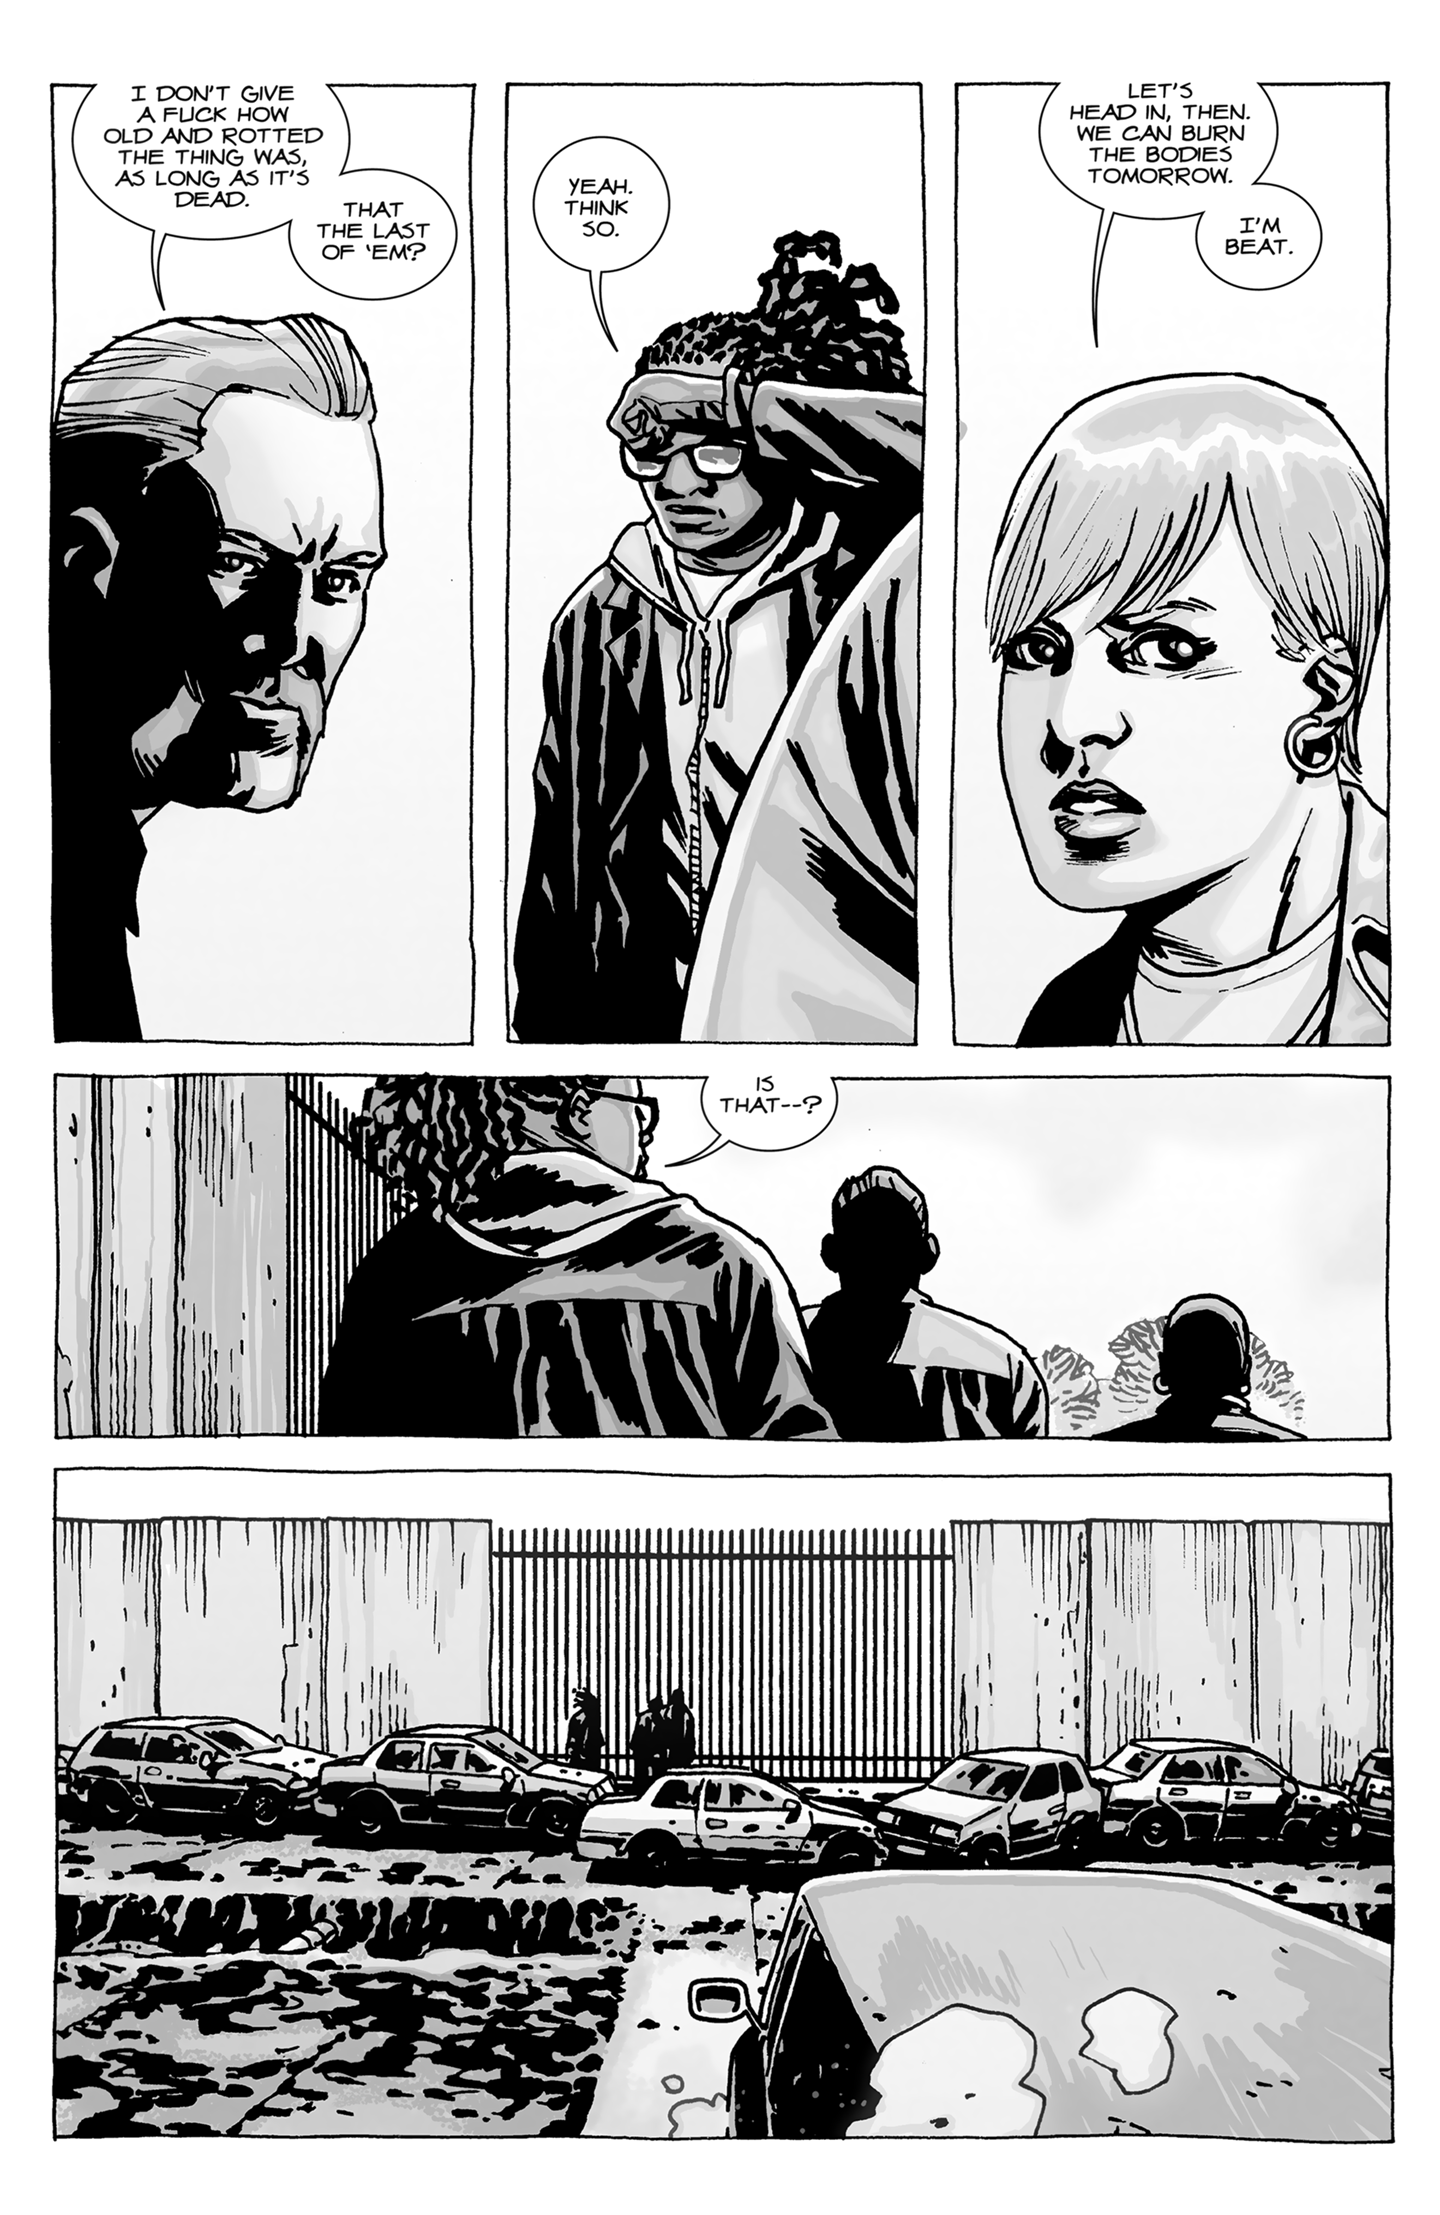 THE WALKING DEAD 97 - SOMETHING TO FEAR, Part One